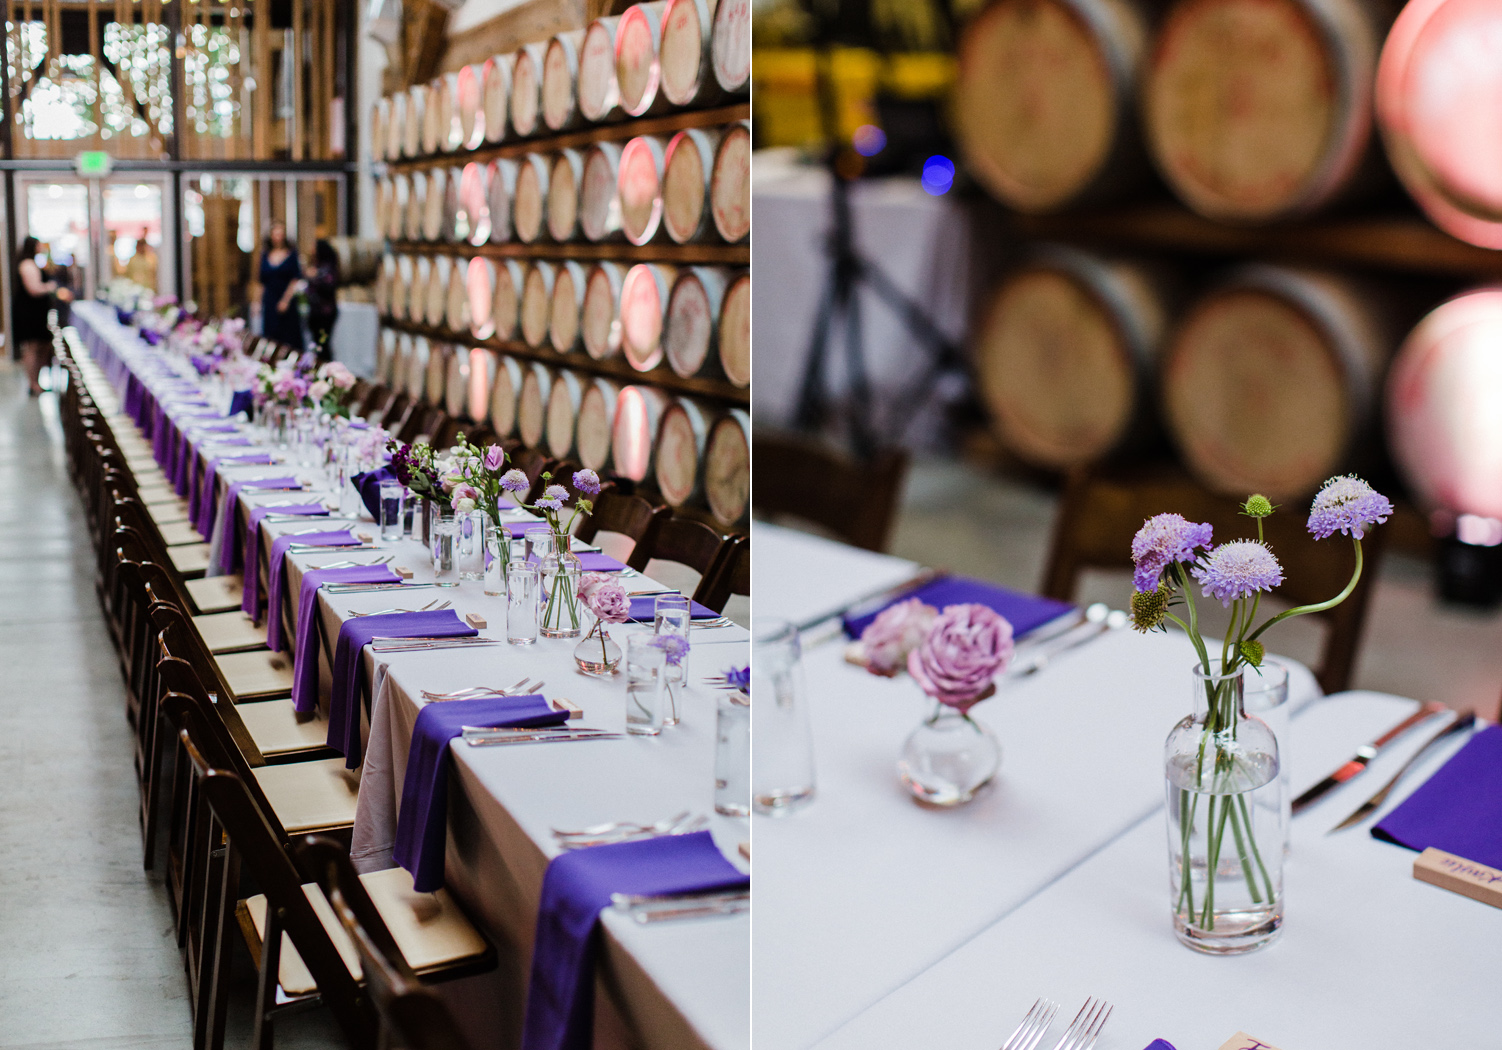 Purple Ombre Farm Table for Wedding Reception at Westland Distillery in SODO Seattle Alexandra Knight Photography